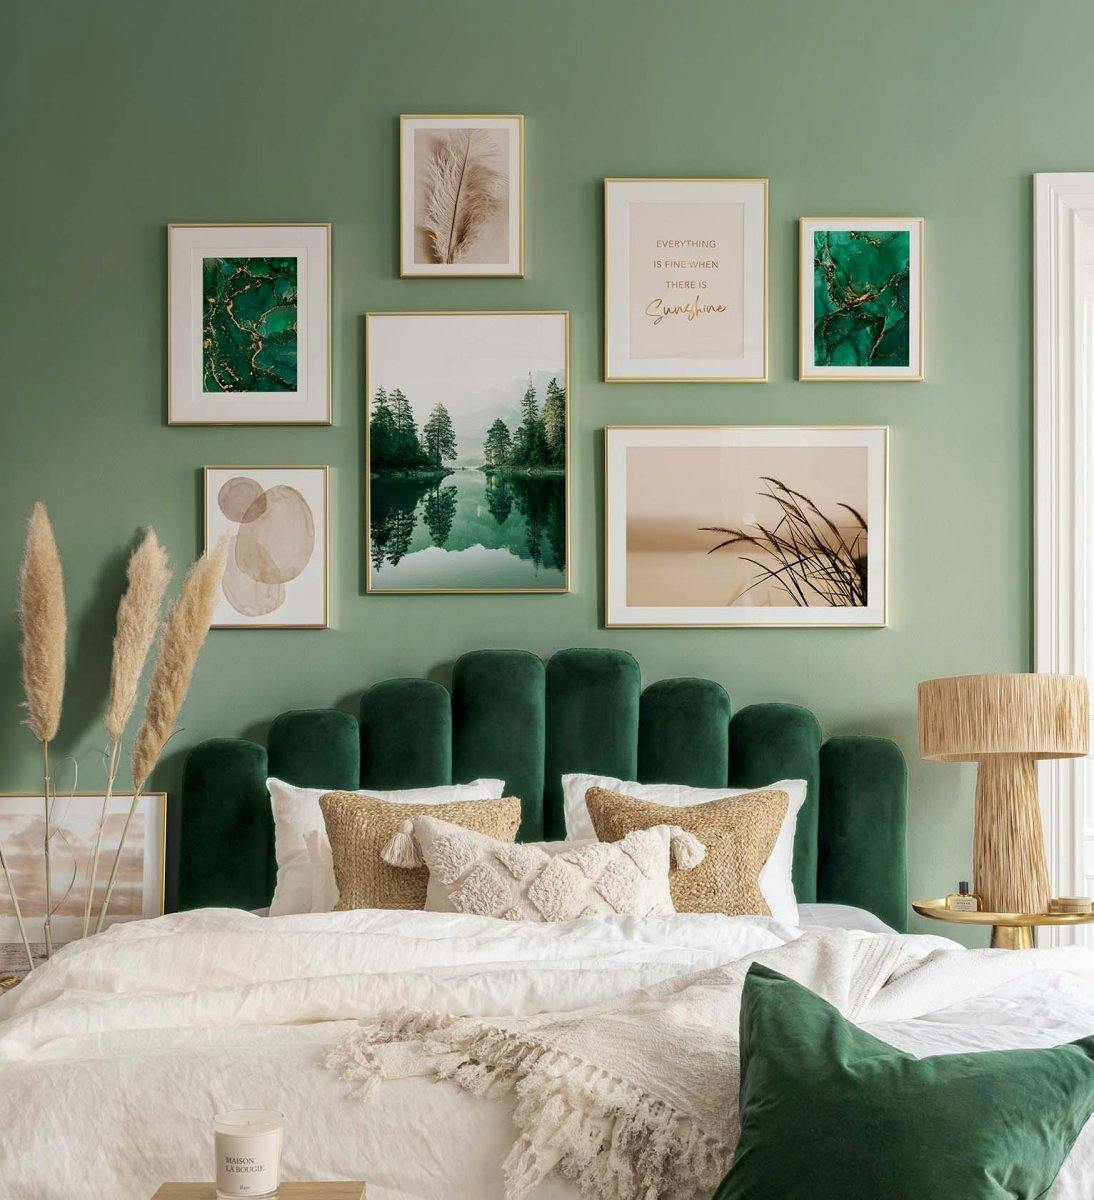 Gallery wall with nature prints in green and beige with golden frames for bedroom